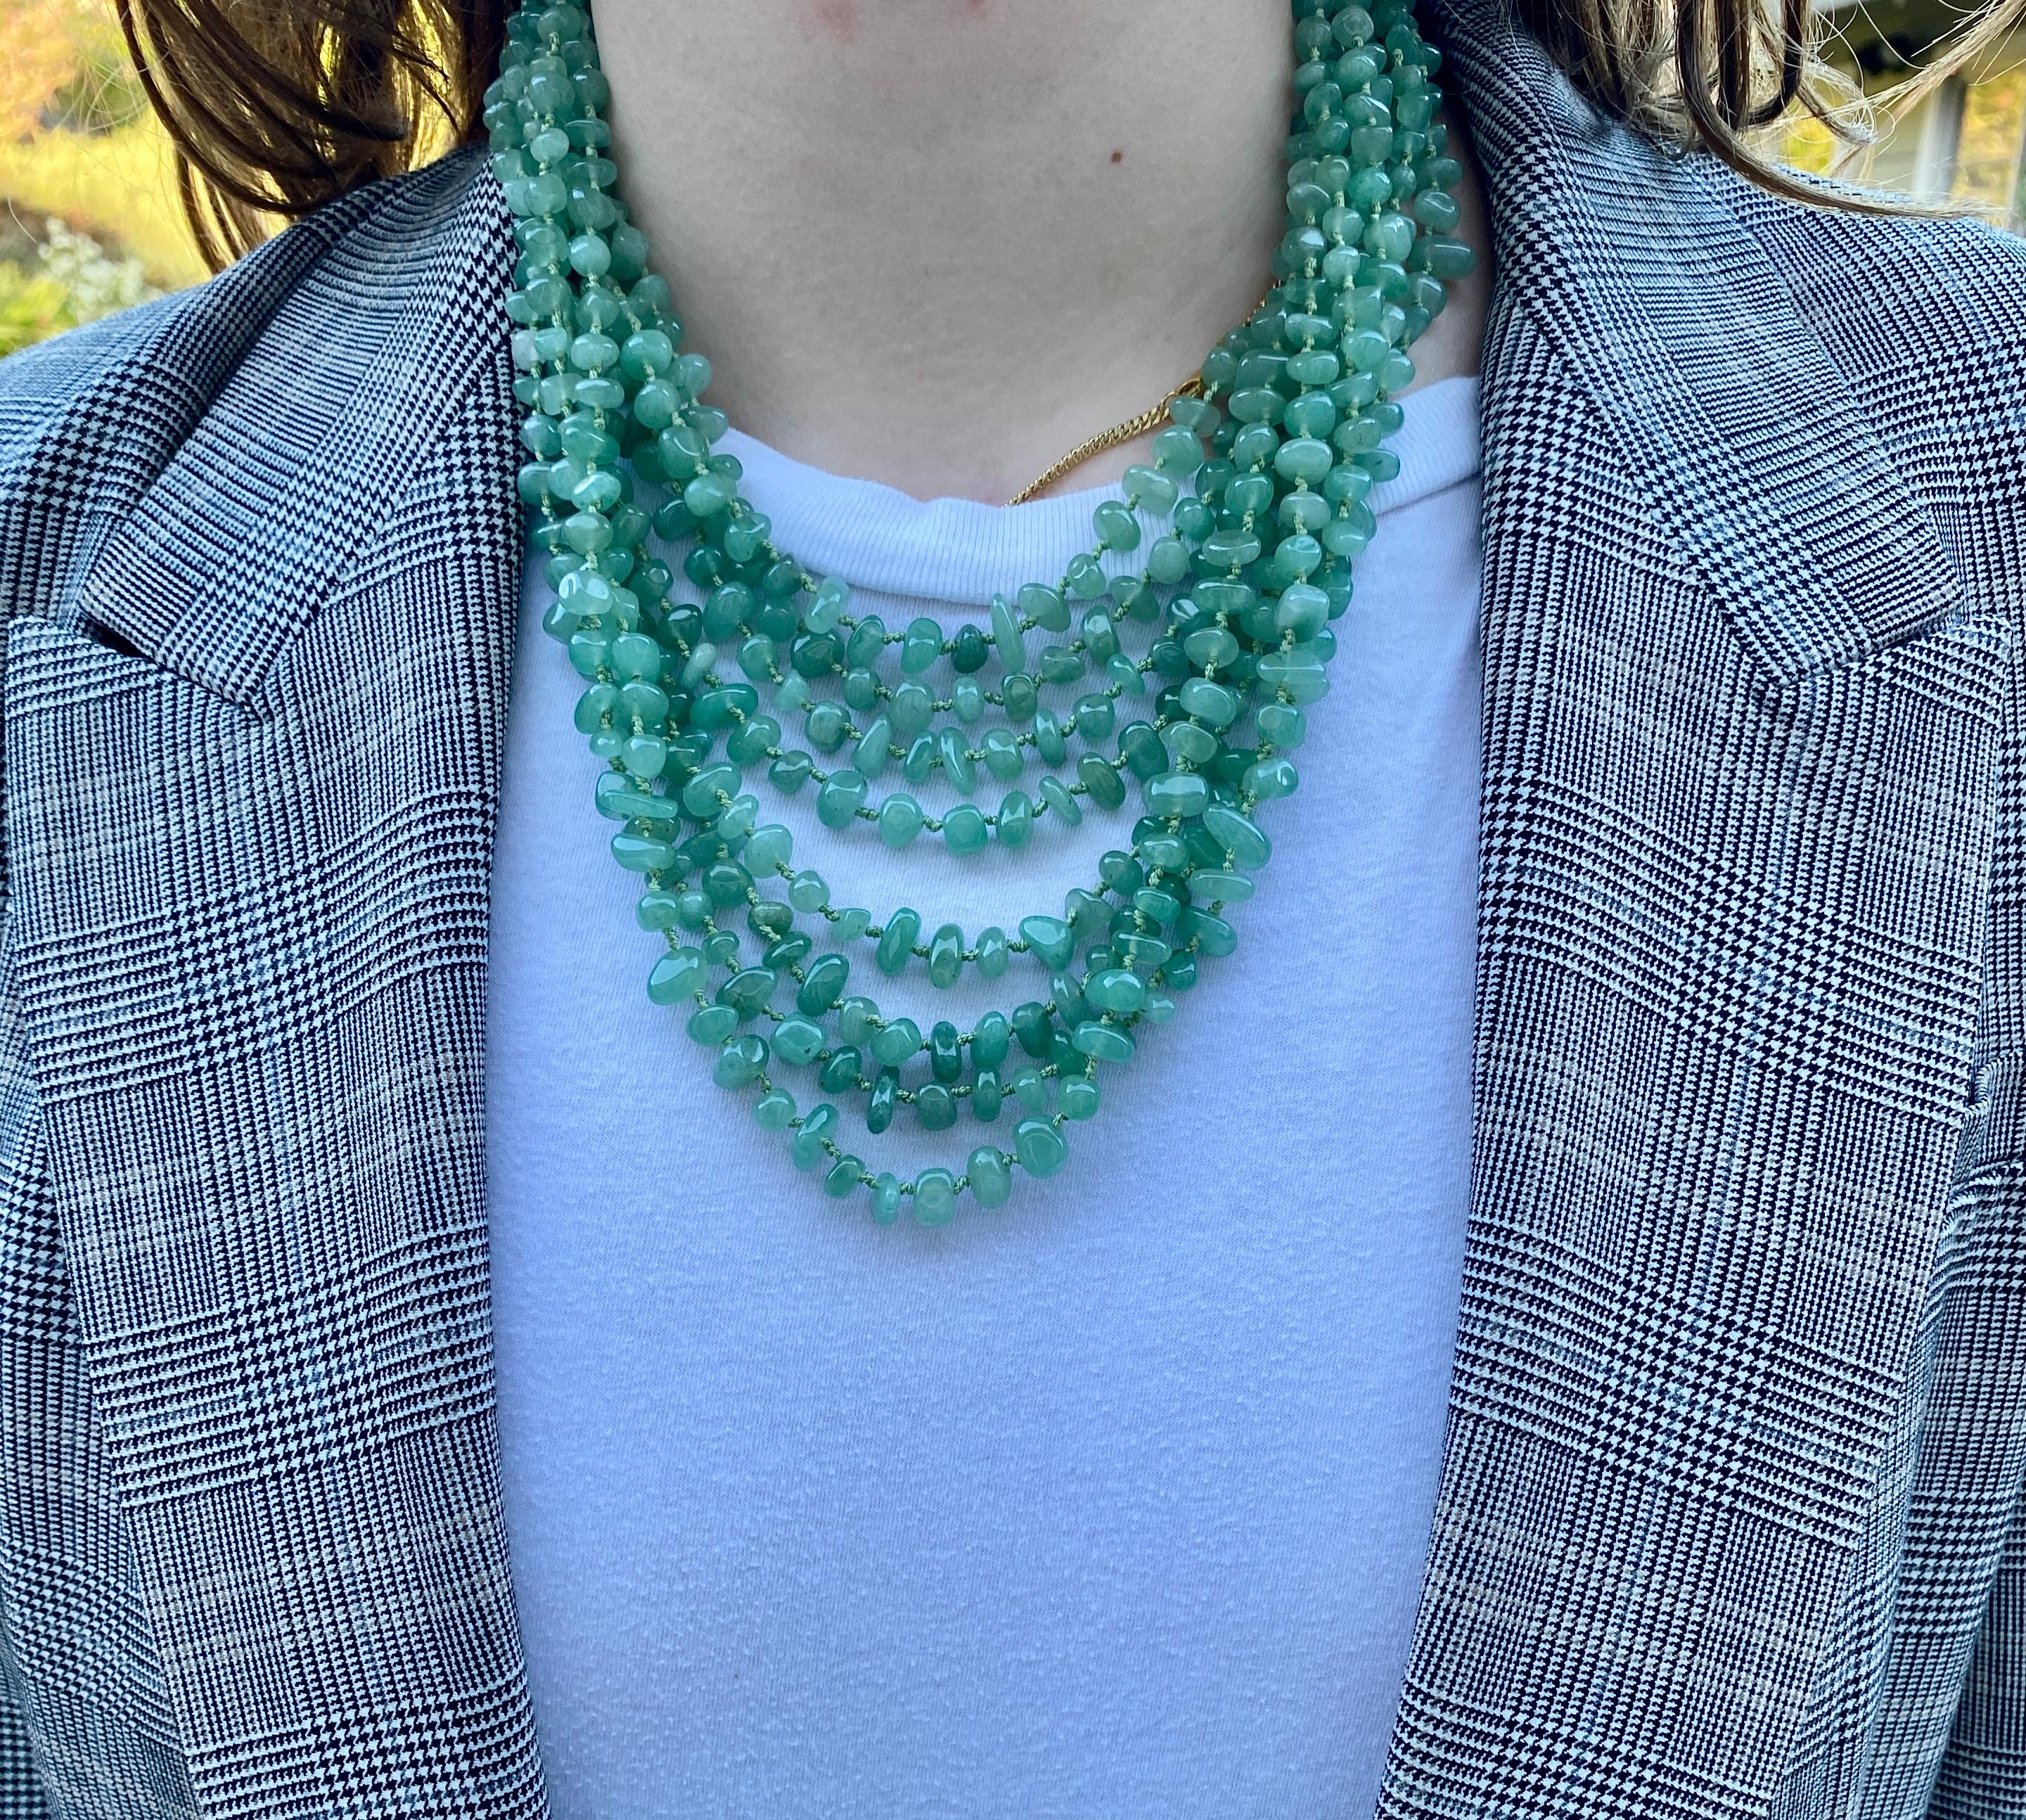 A dramatic, eight-strand necklace featuring celadon green-colored aventurine beads individually double-knotted on green silk thread with an aventurine clasp.

The eight graduated strands vary in length, the shortest measuring approximately 17 inches